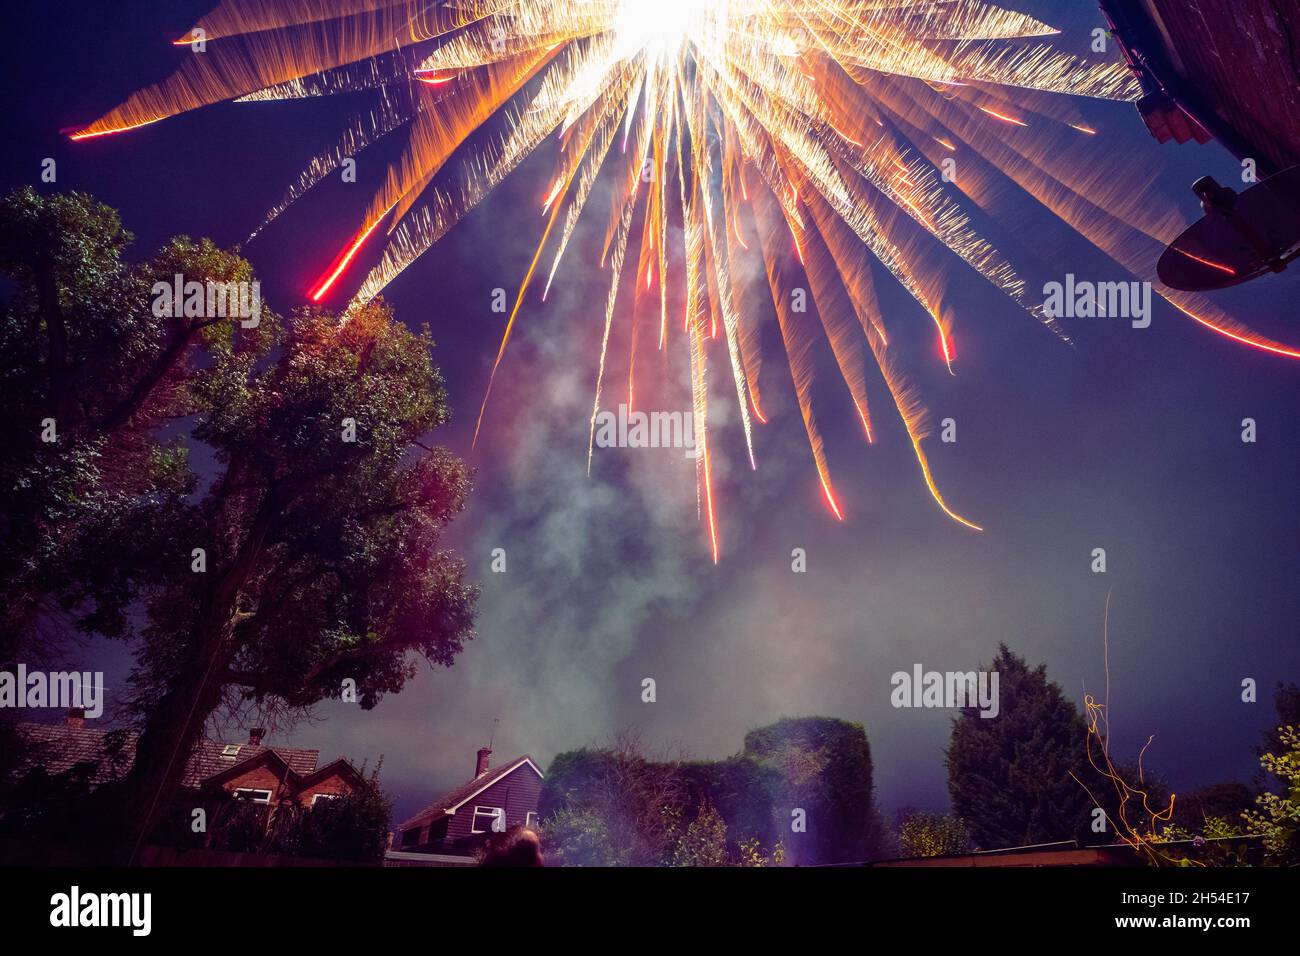 Pembury, Kent, UK. 05 November 2021. A large rocket is let off in a small garden by a large tree in a home firework show. A fire risk and dangerous in a small garden.©Sarah Mott / Alamy Live News Stock Photo